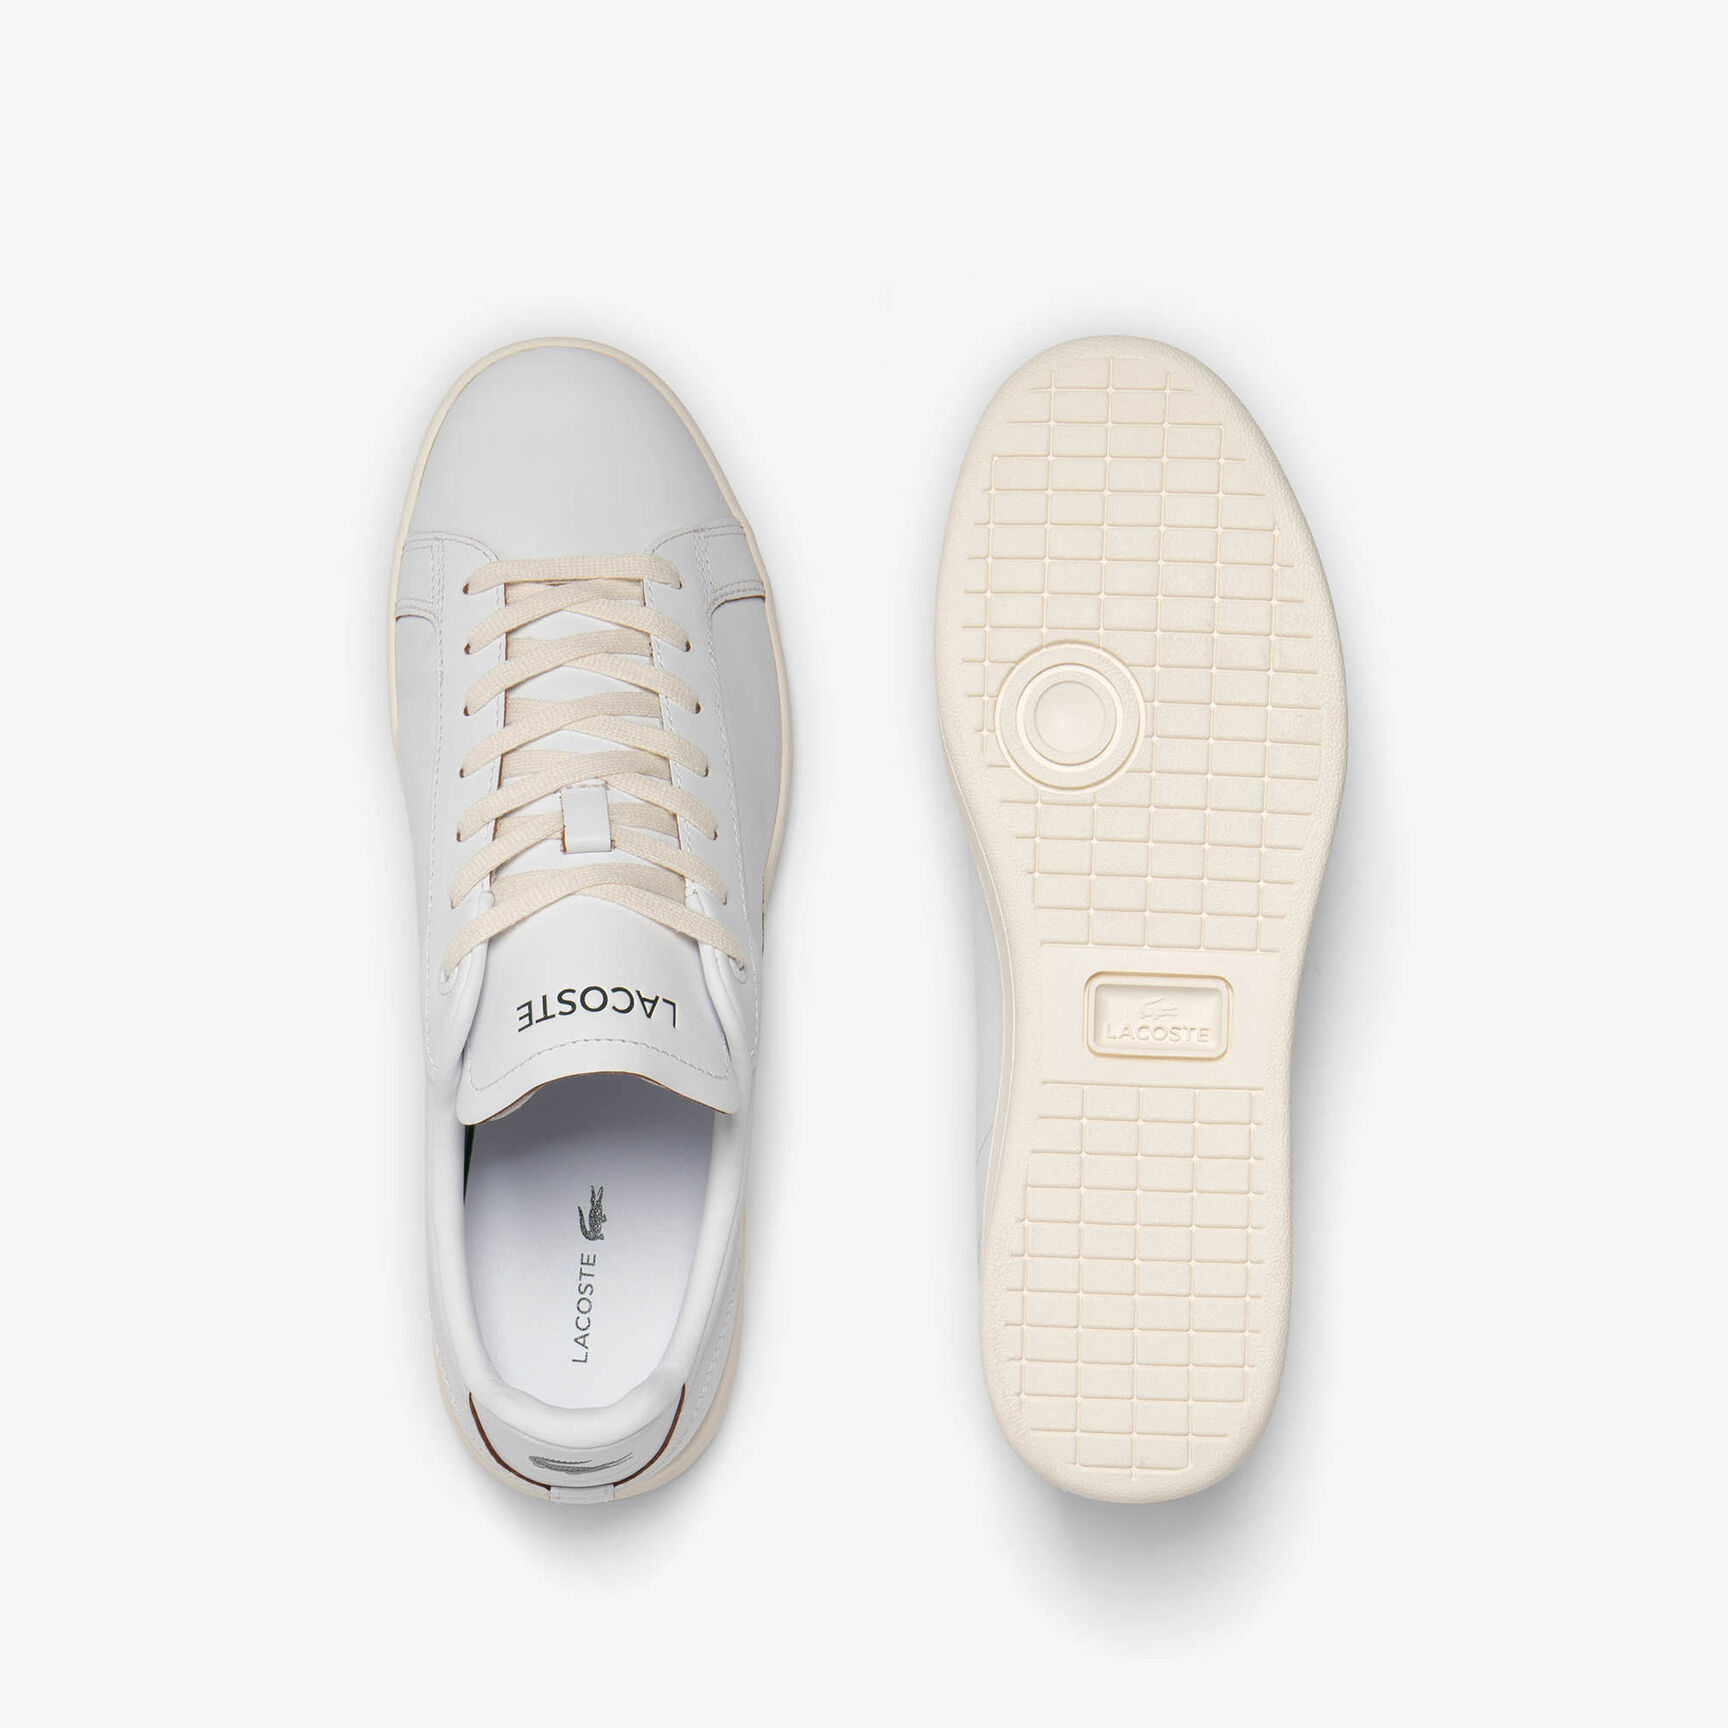 Buy Men's Carnaby Pro Tone on Tone Leather Trainers | Lacoste UAE